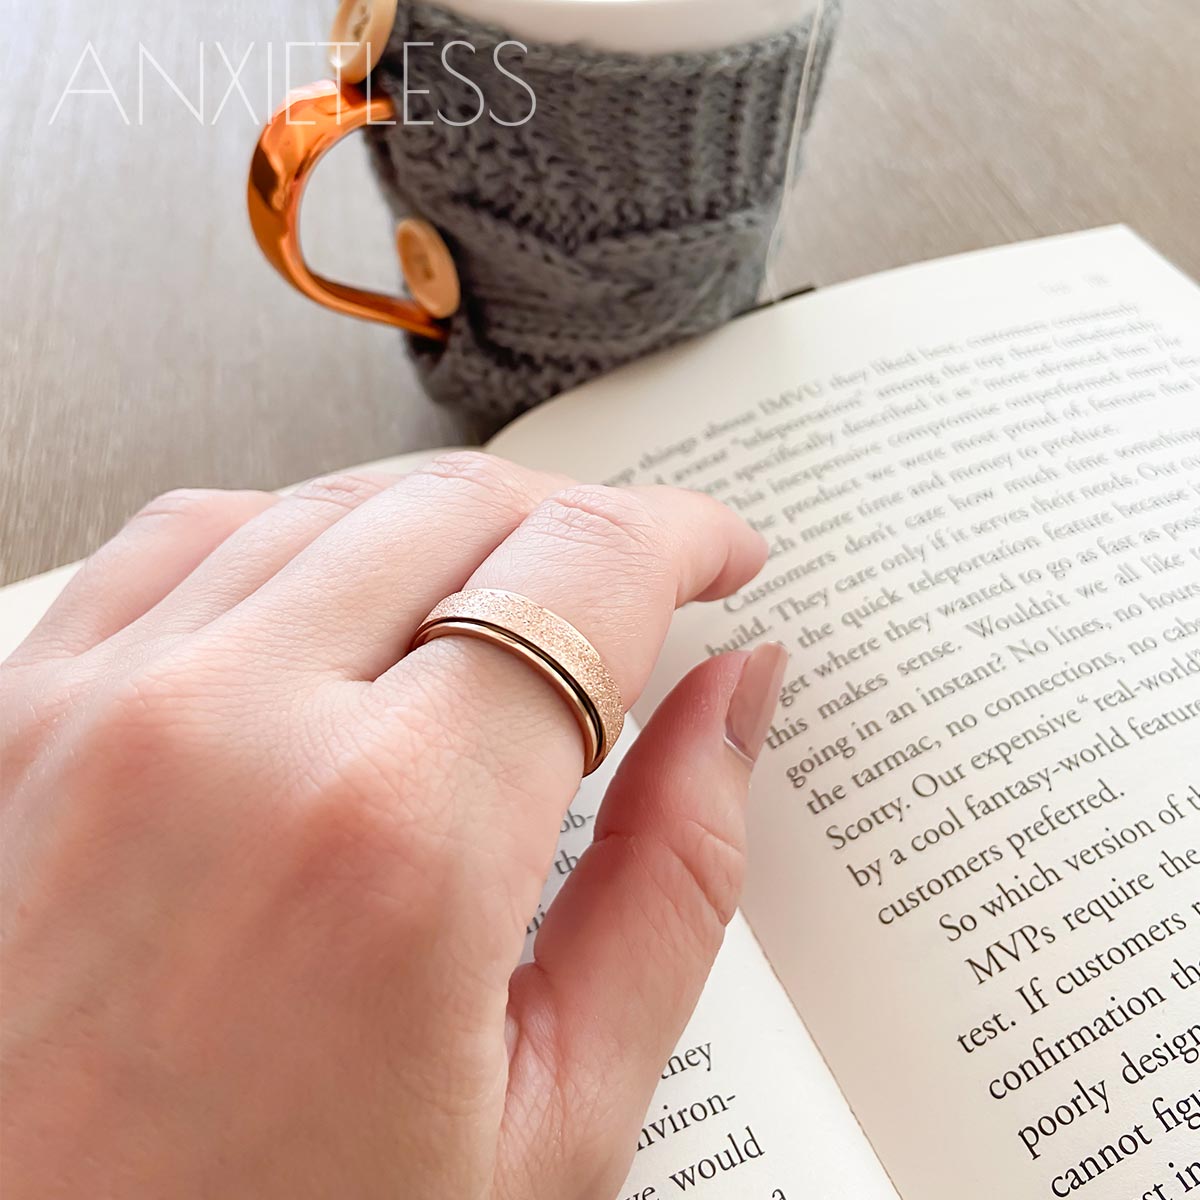 Woman wearing rose gold anxiety ring on index finger, with a book and a mug with a grey knitted cover in the background